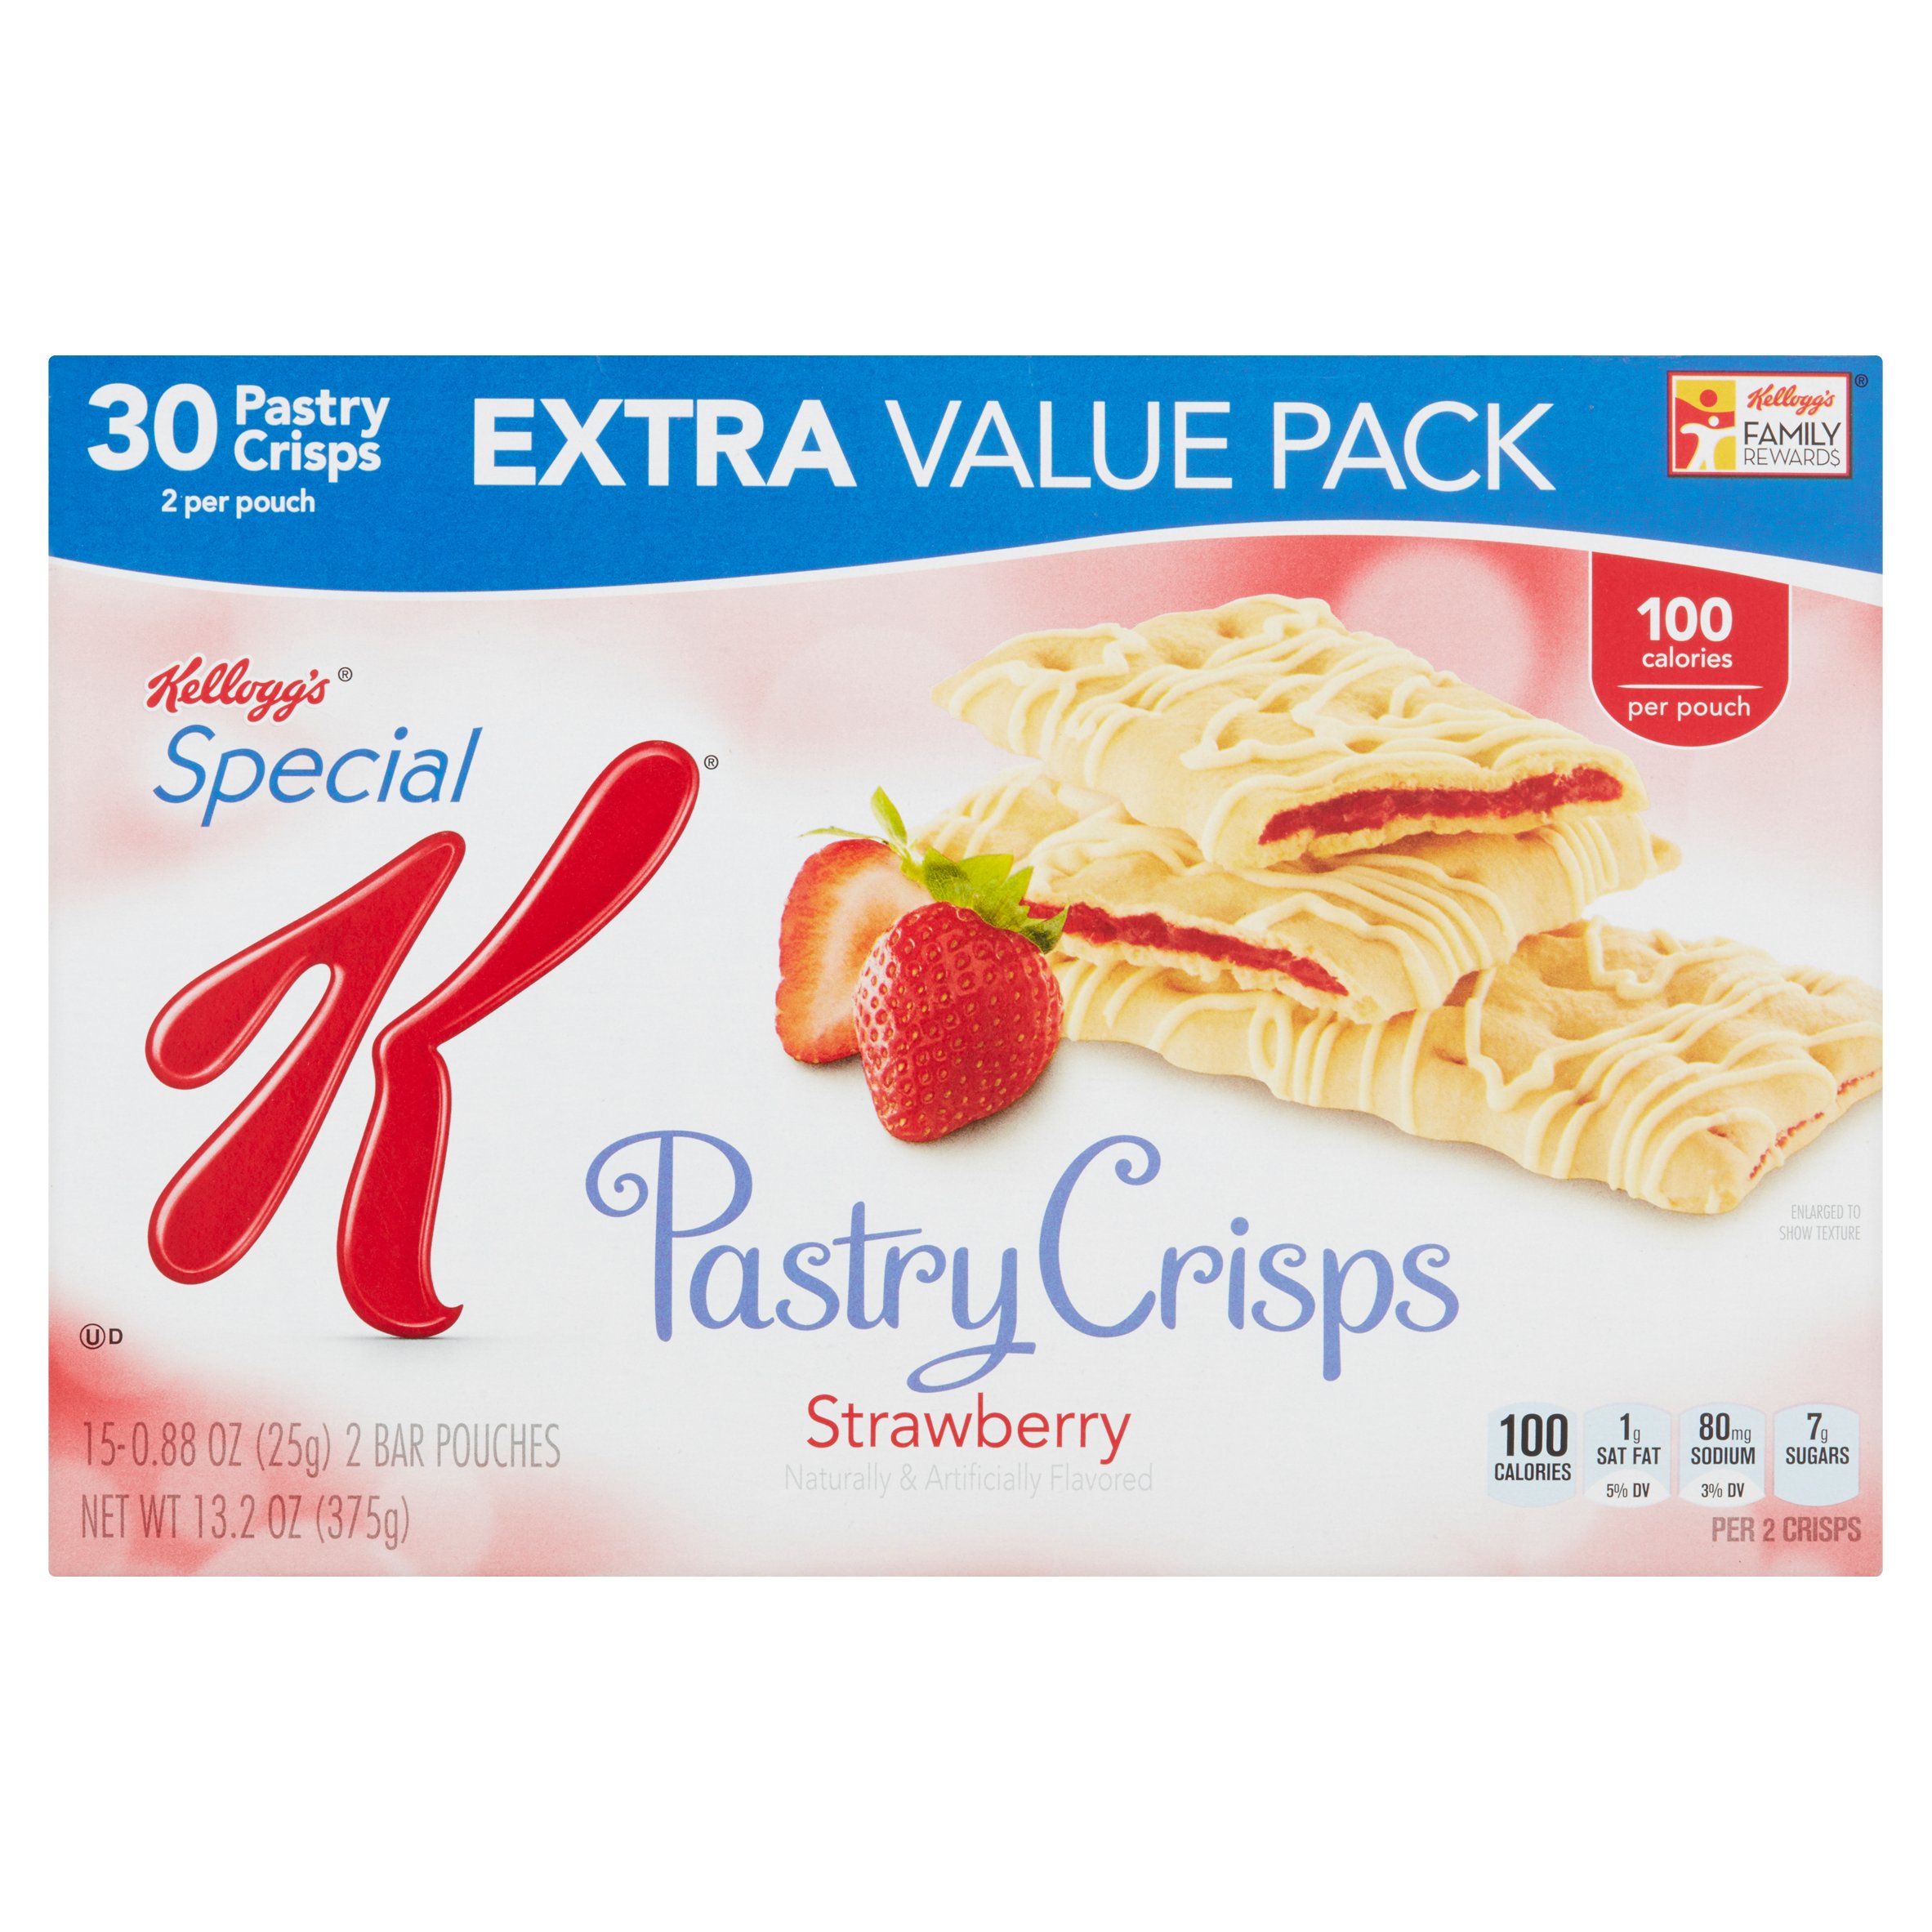 Kellogg's Special K Strawberry Pastry Crisps, 0.88 oz, 15 count - image 1 of 5